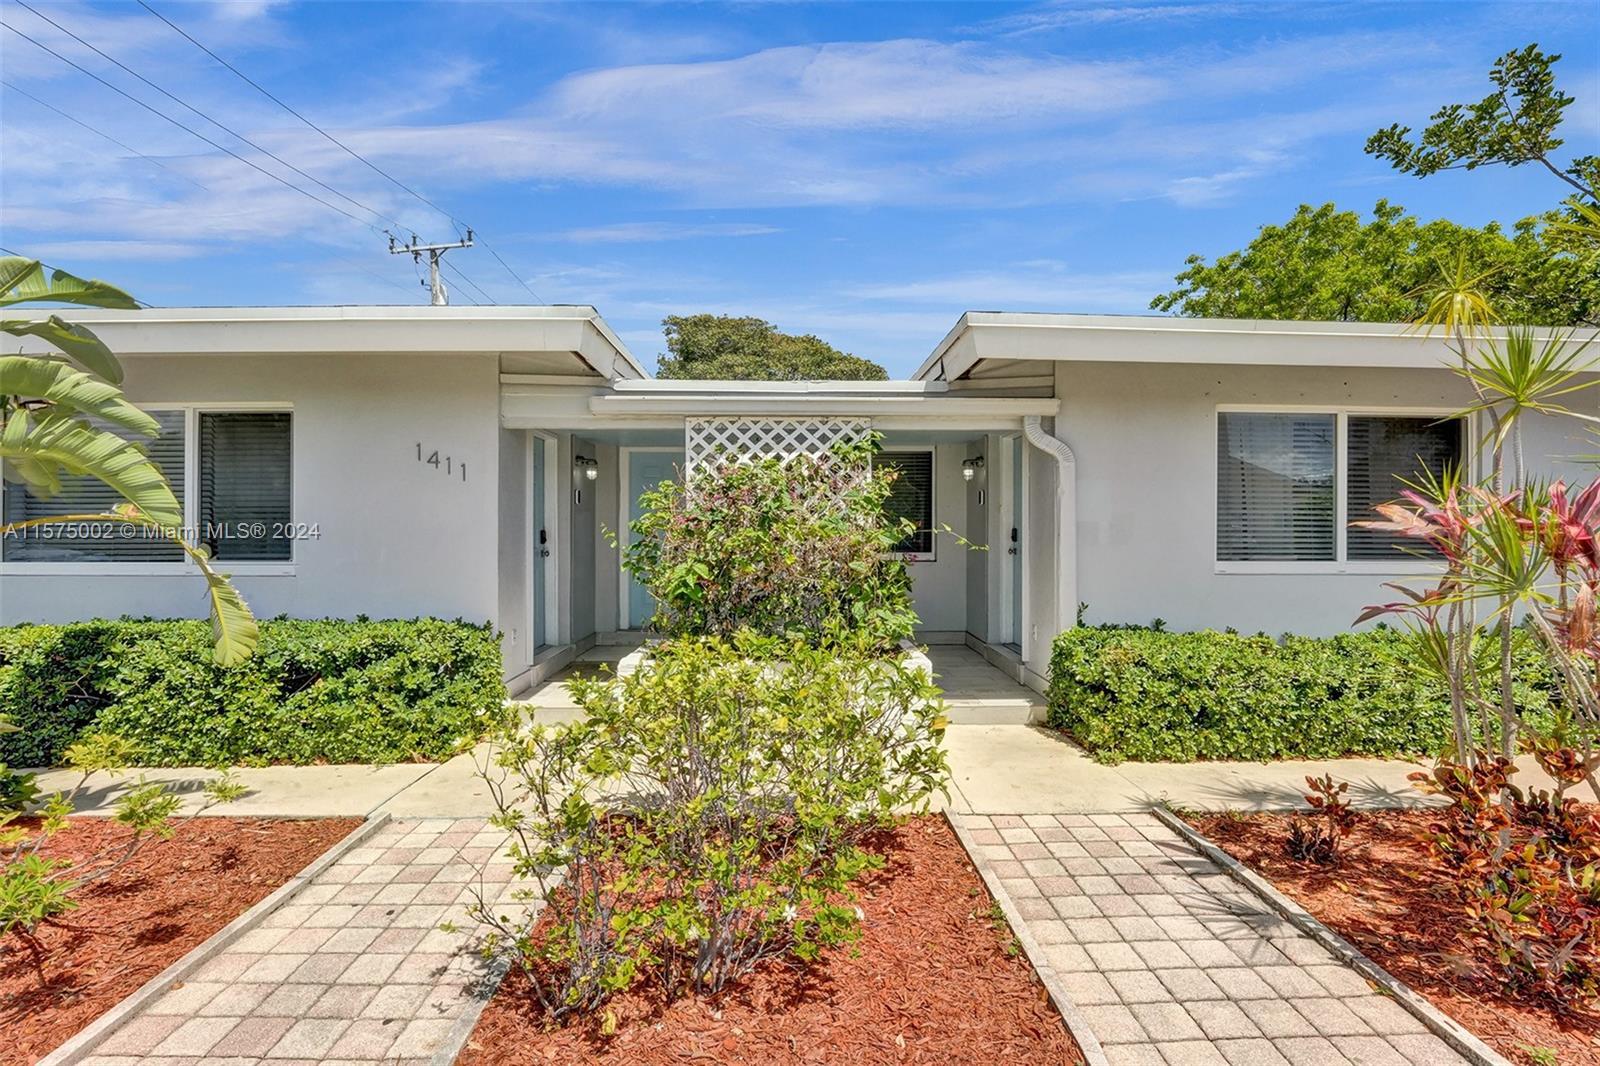 Photo of 1411 NE 12th St in Fort Lauderdale, FL